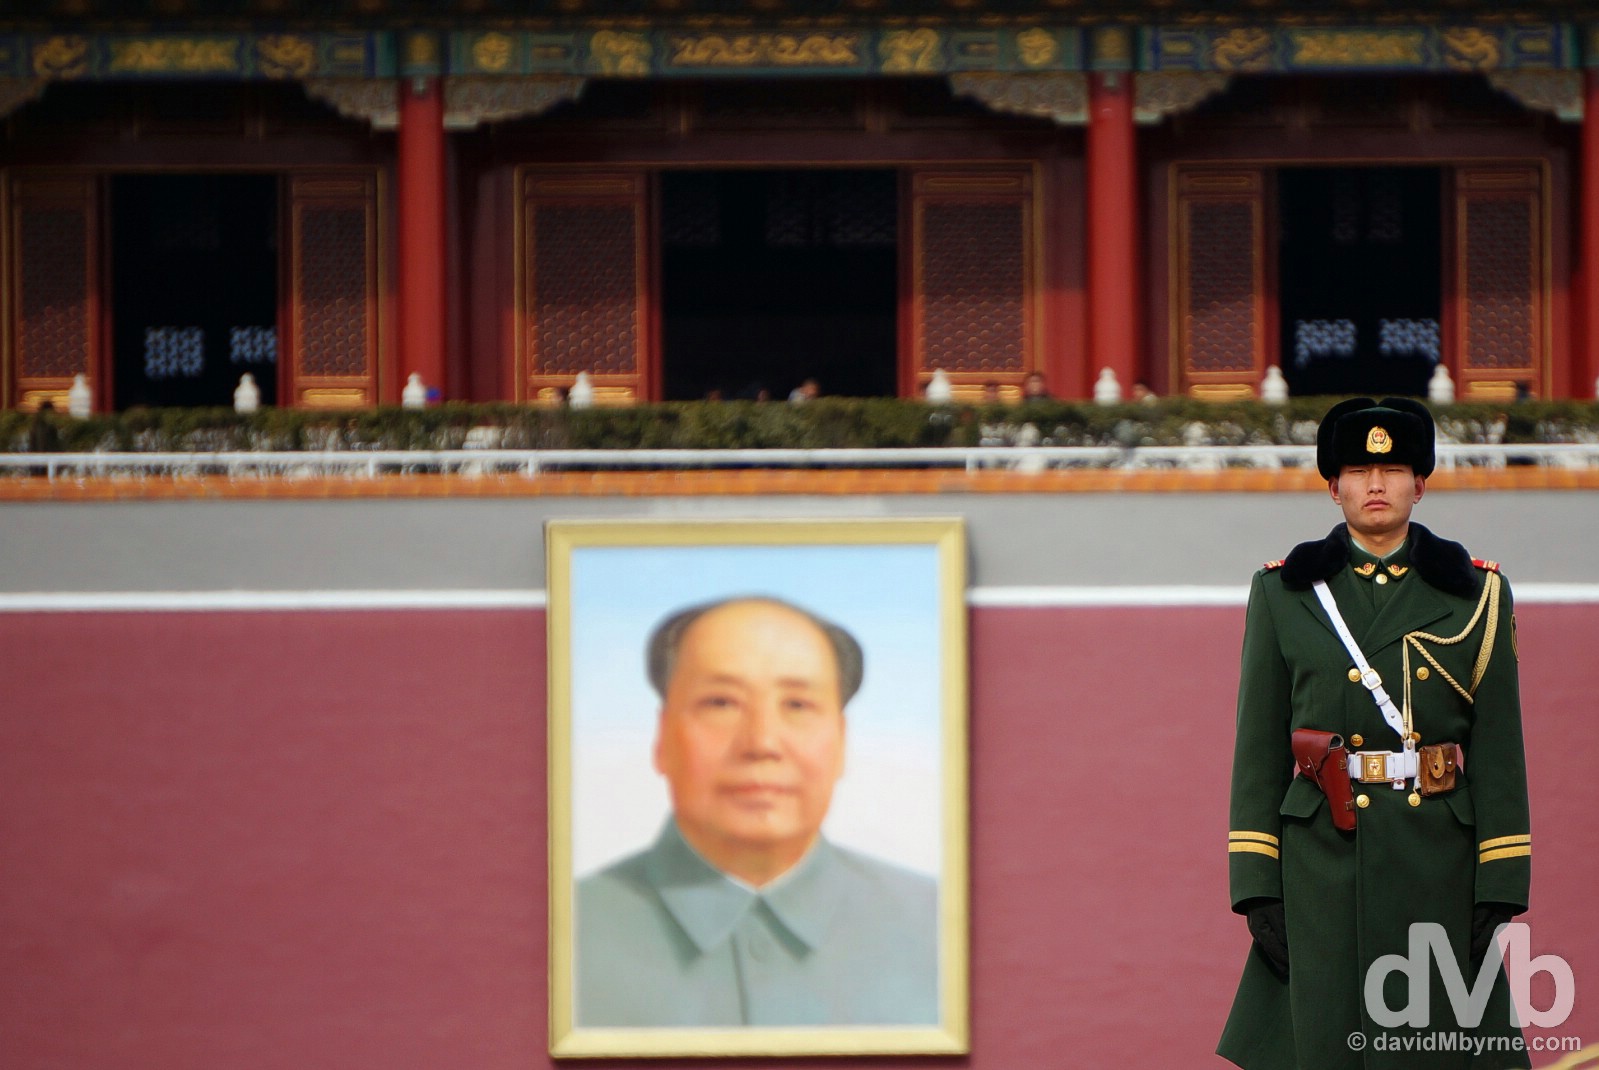 A guard in Tiananmen Square fronting the Tiananmen Gate, or Gate of Heavenly Peace, the entrance to the Place Museum, a.k.a. The Forbidden City, in Beijing, China. February 4, 2015.